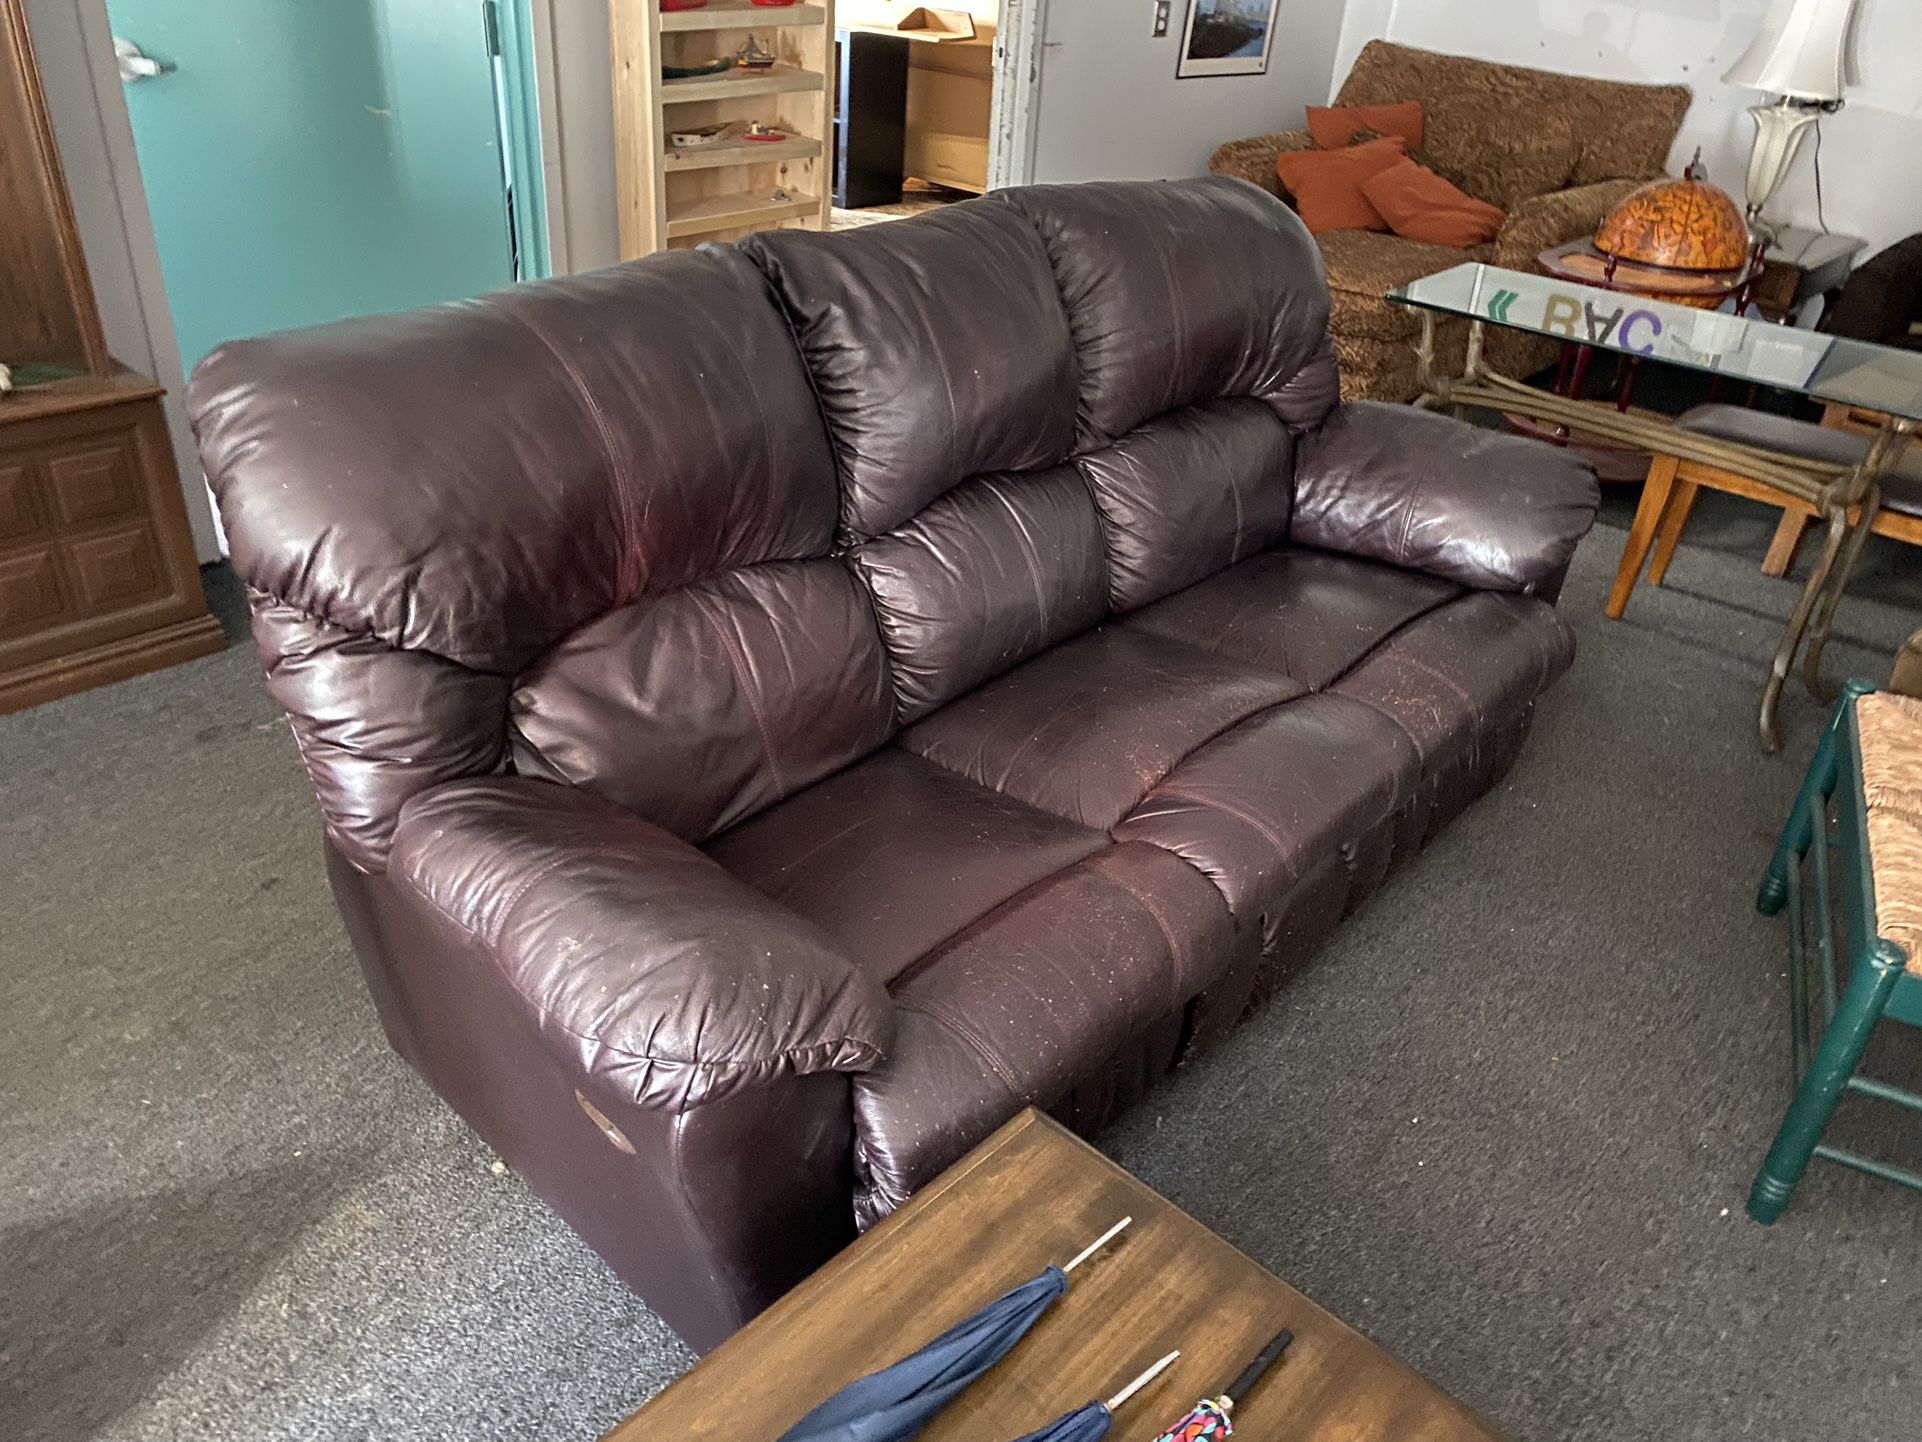 Brown Leather Reclining Sofa Couch $125 80” x 40” x 40” Some Wear/Tear Scratching